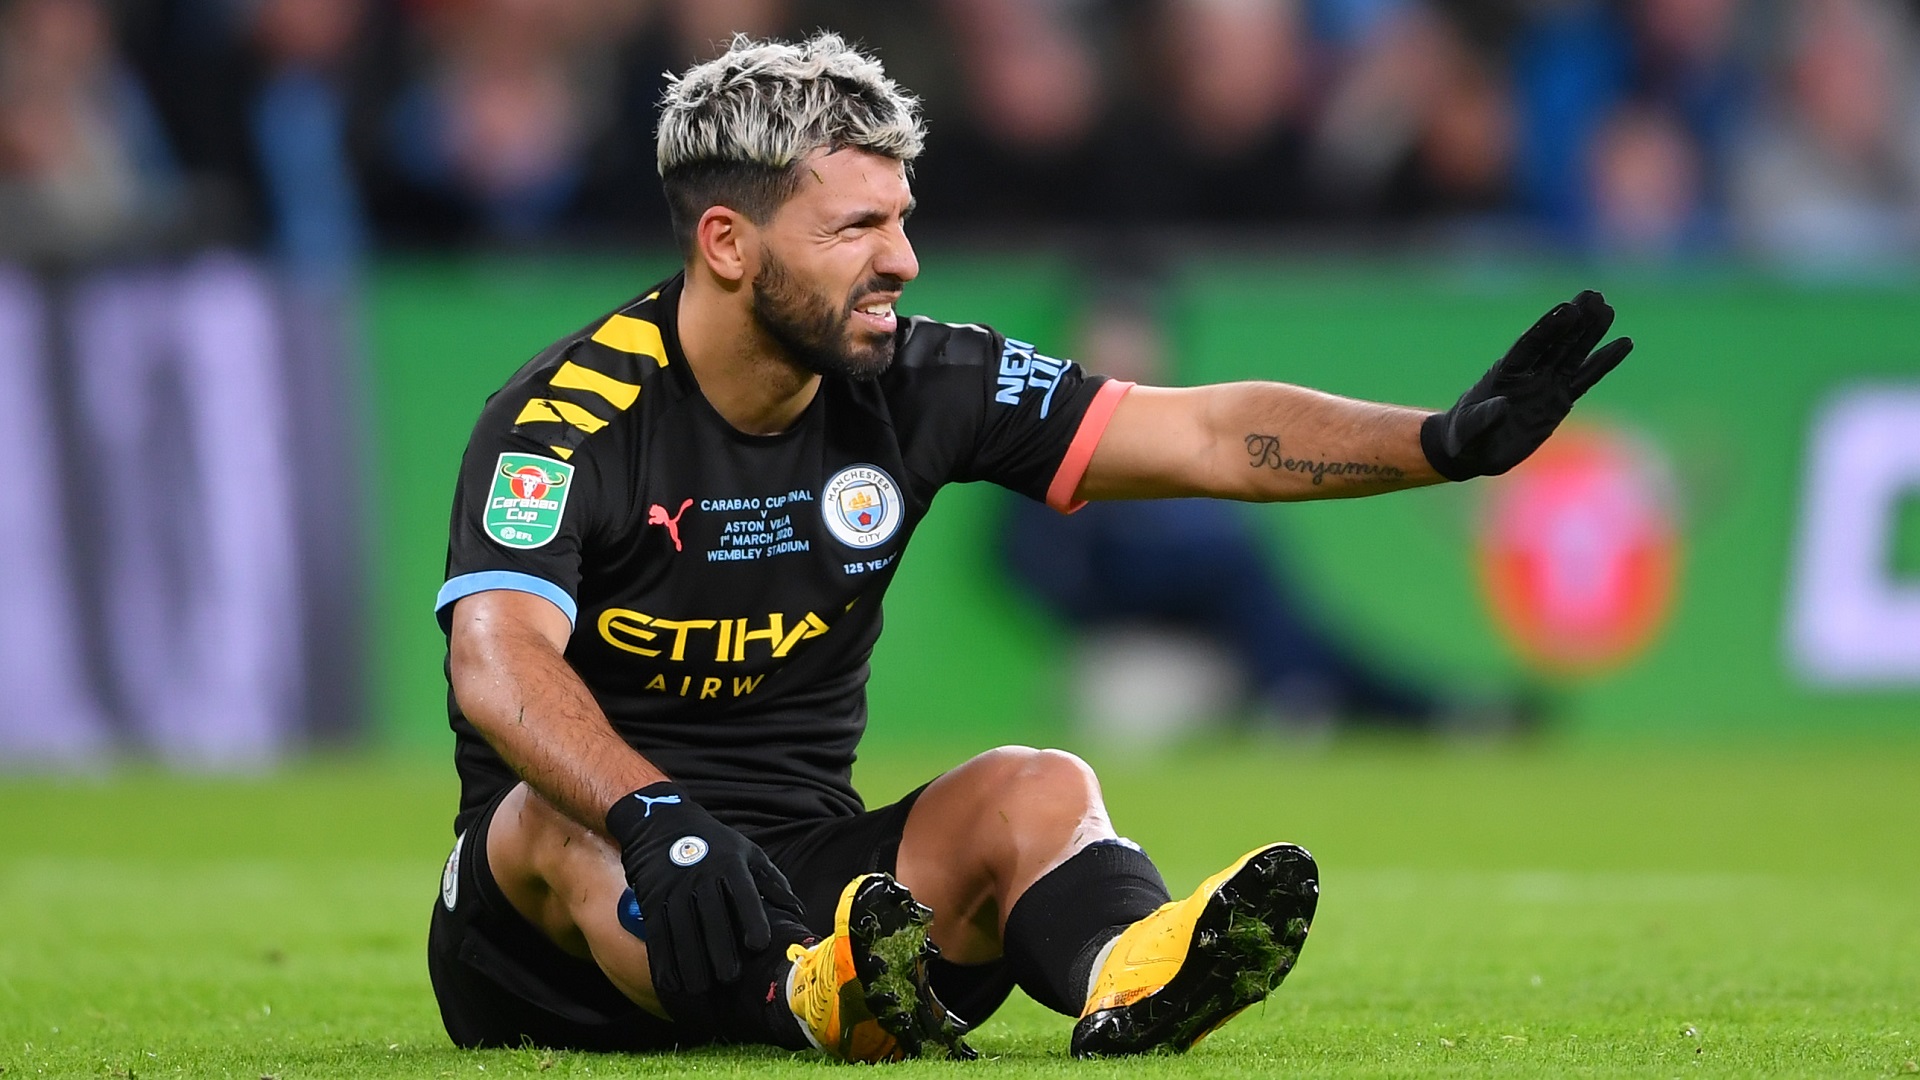 Aguero blow for Barcelona as striker ruled out for 10 weeks with calf injury